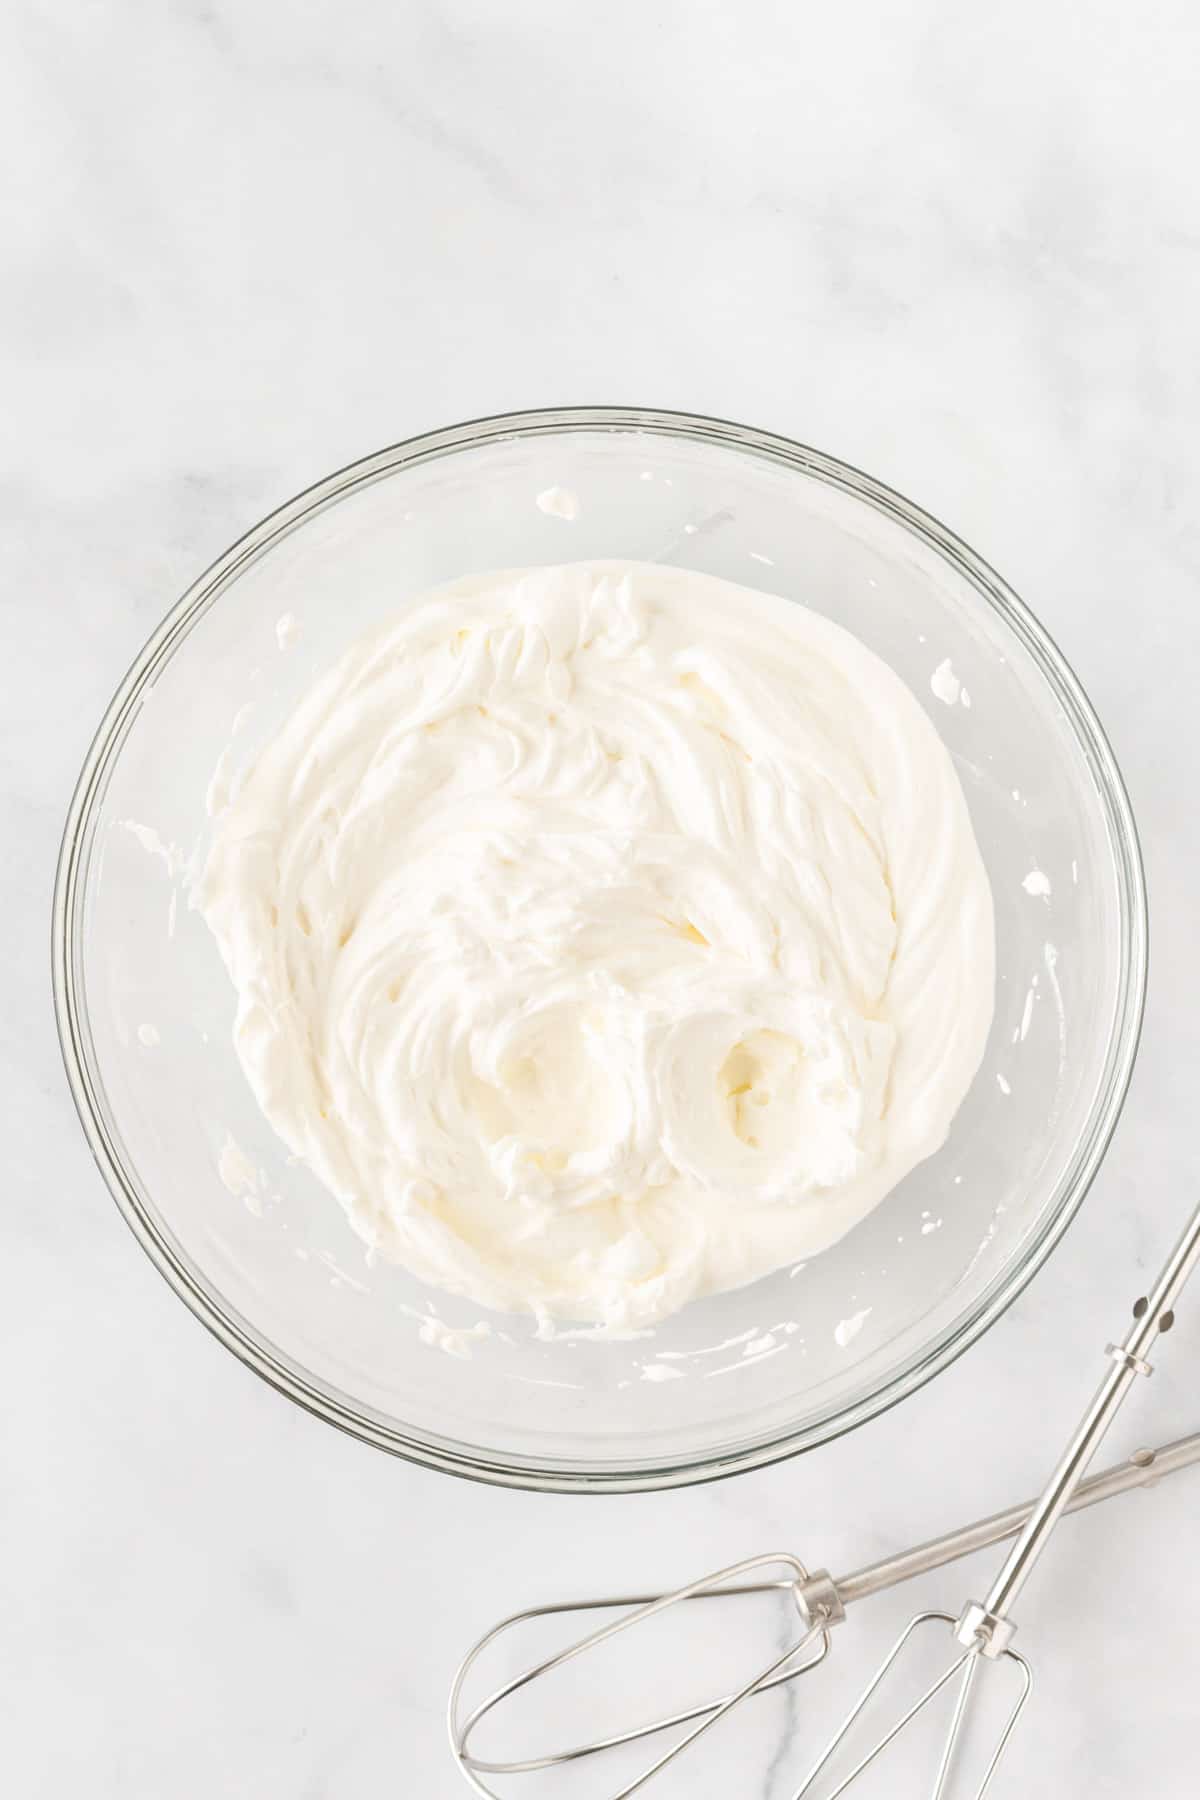 homemade whipped cream in a mixing bowl